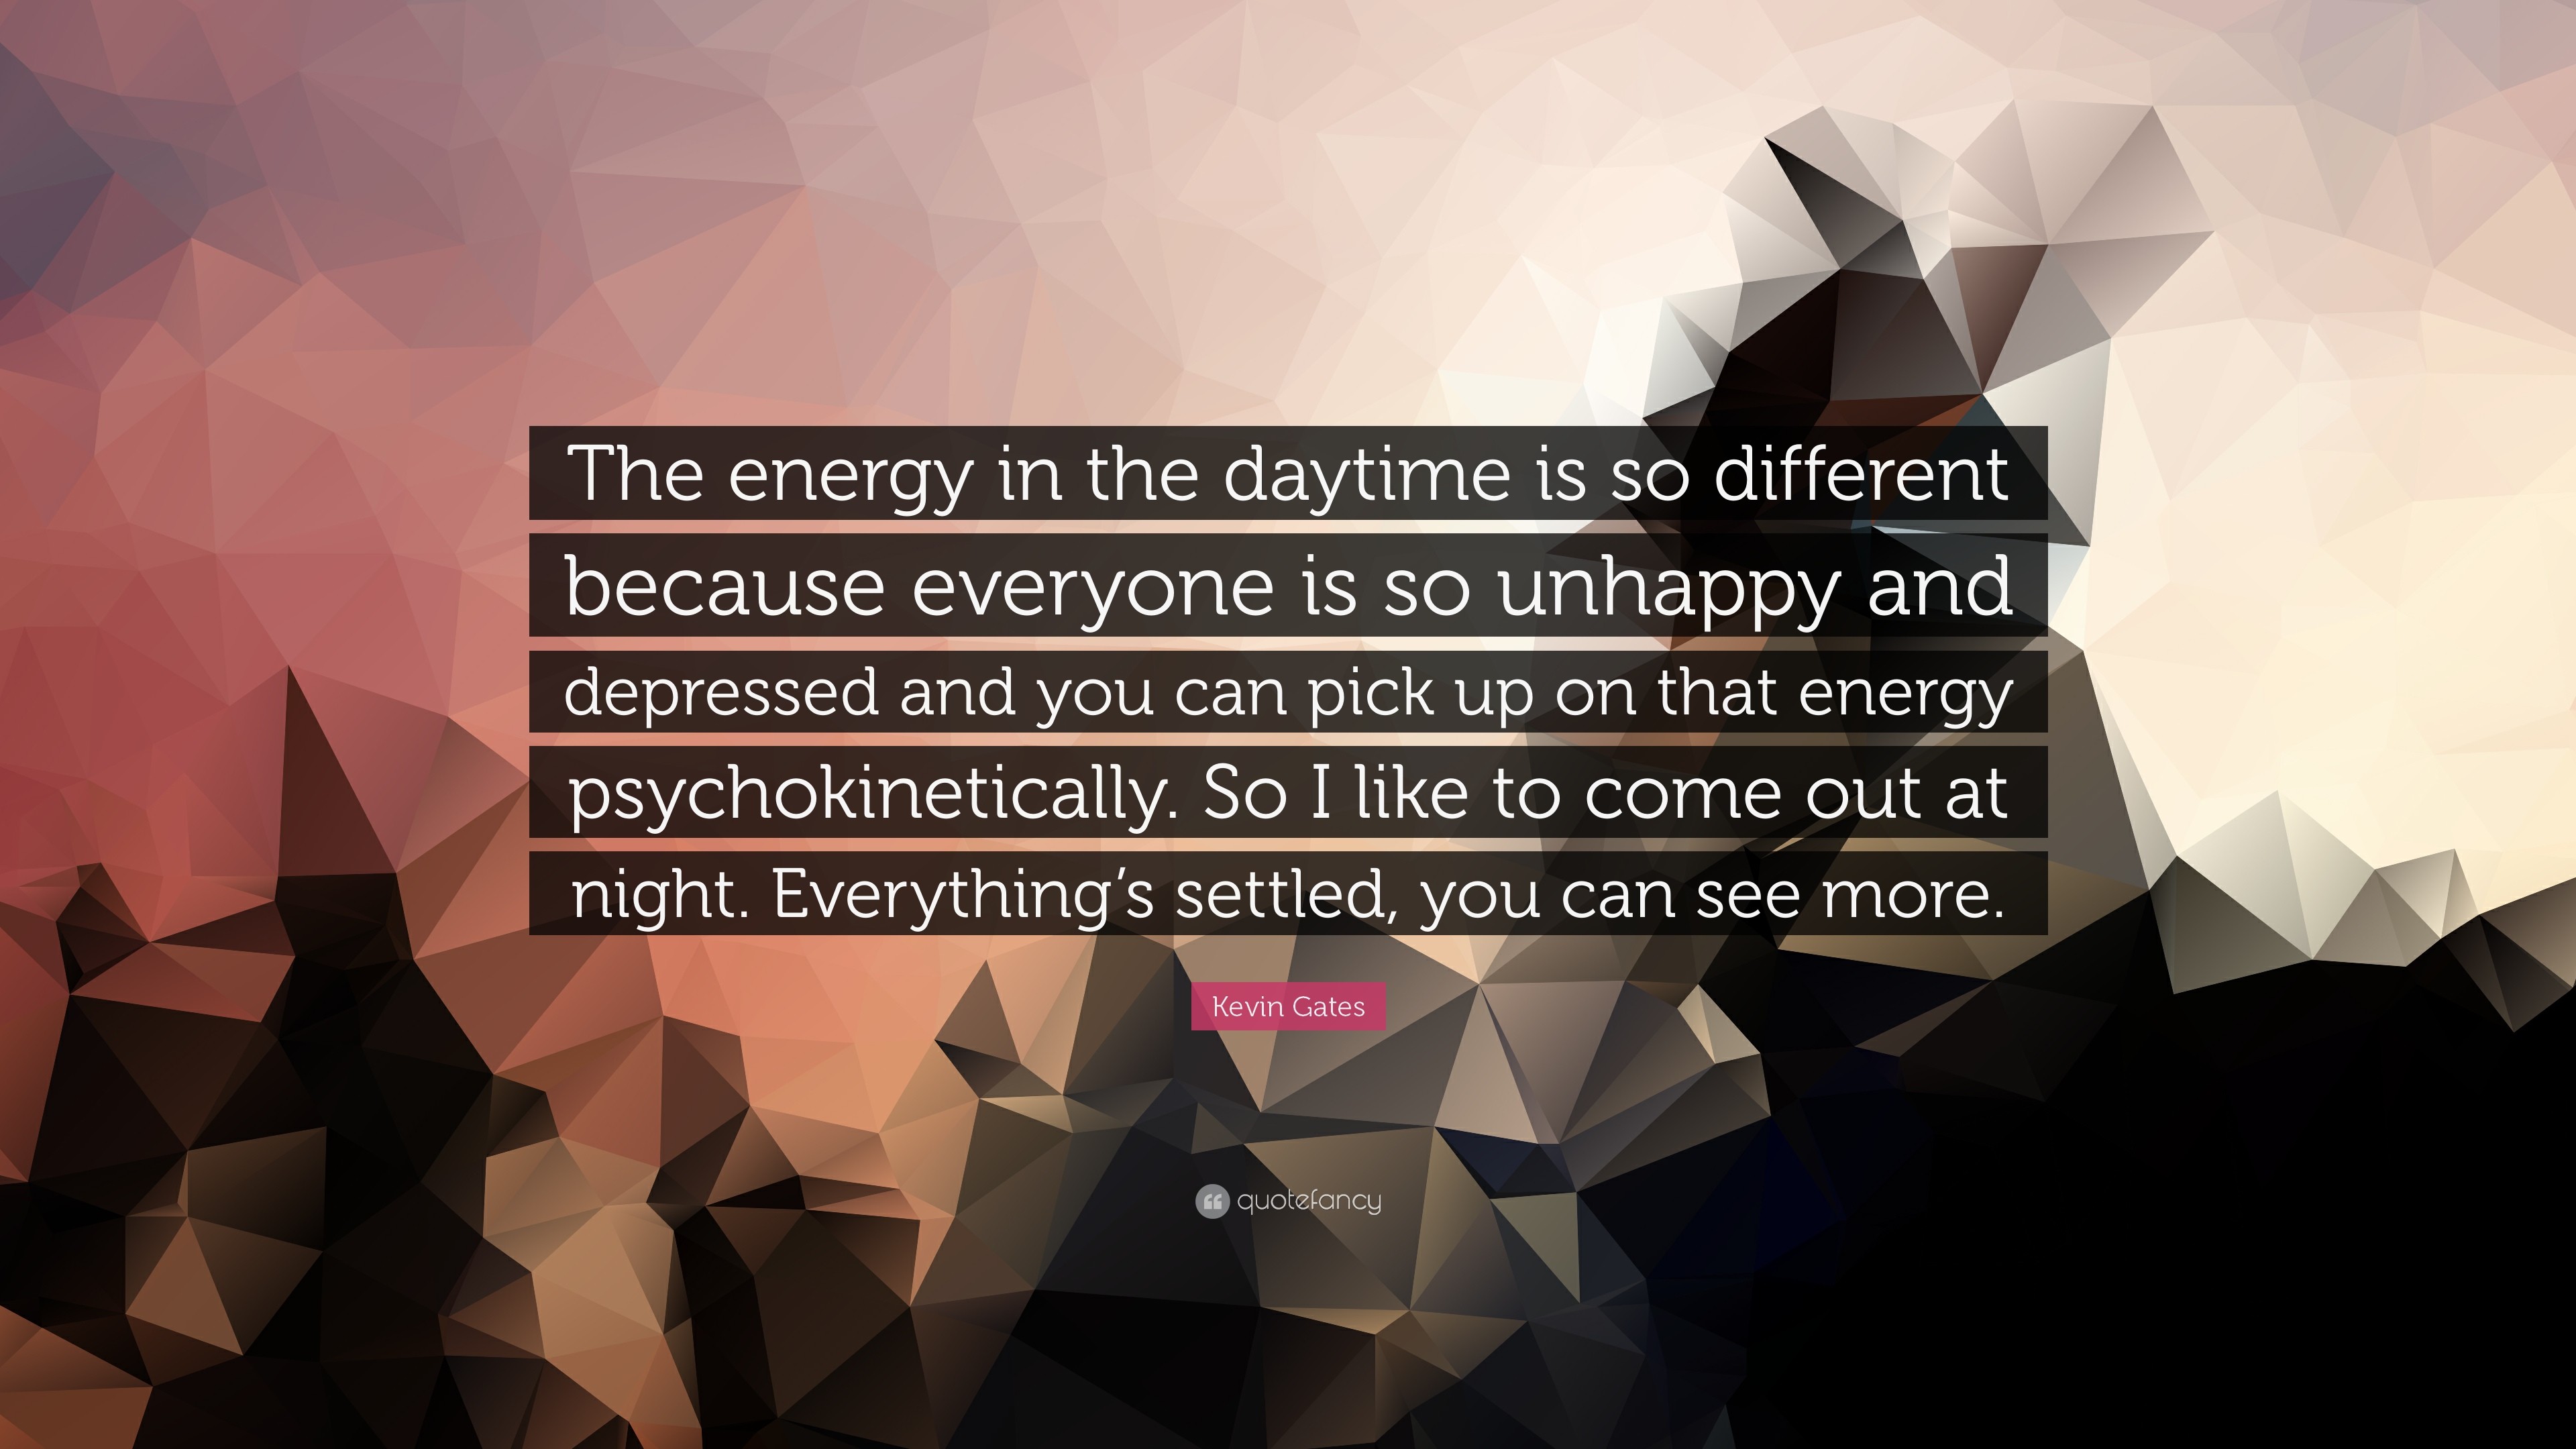 3840x2160 Kevin Gates Quote: “The energy in the daytime is so different because  everyone is